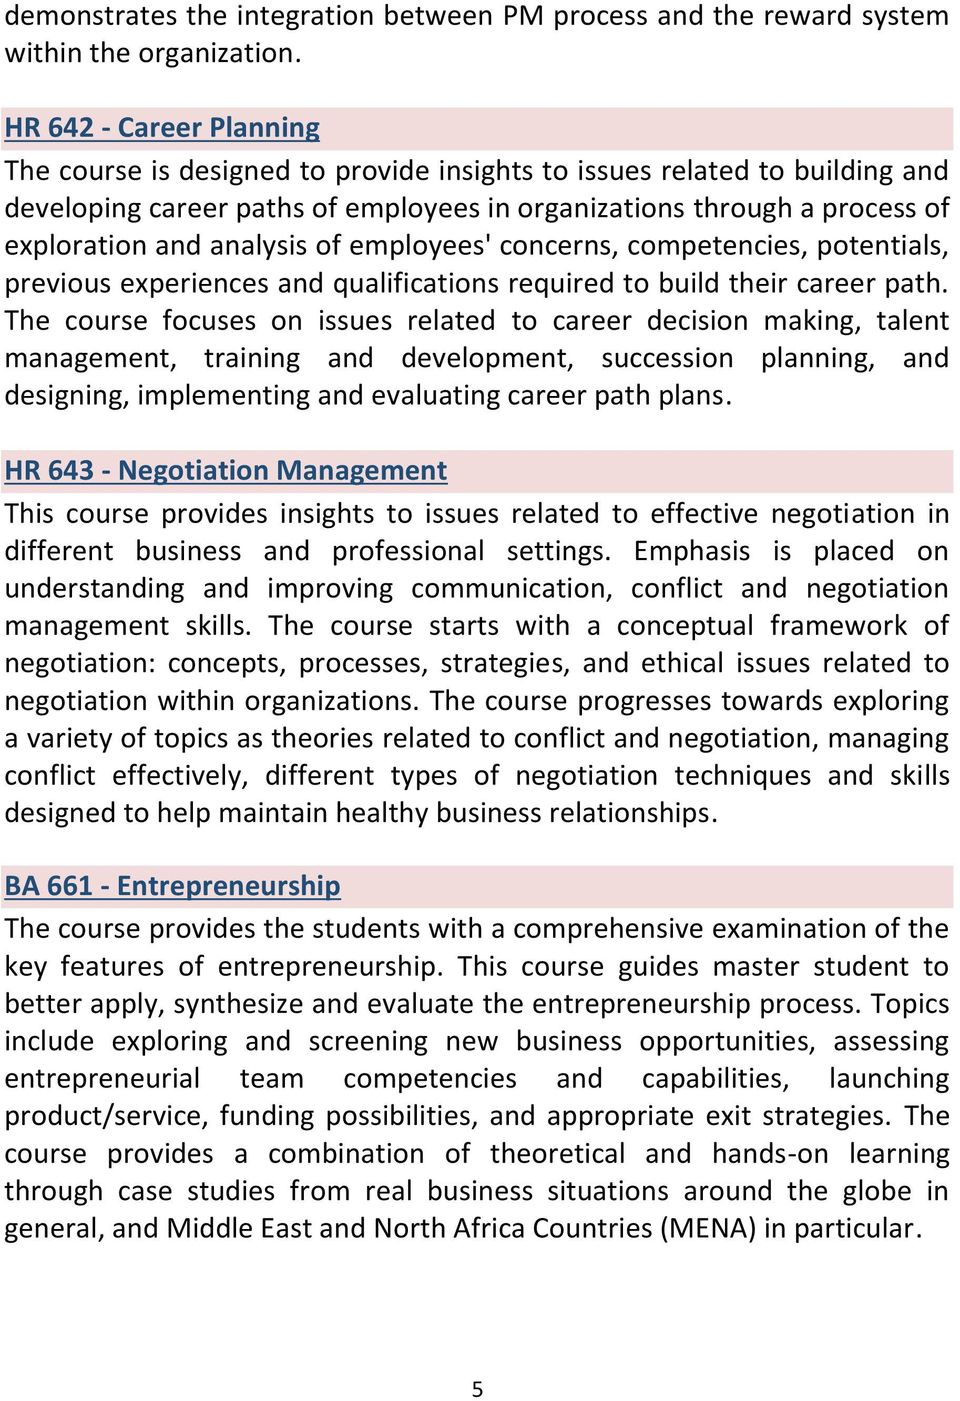 analysis of employees' concerns, competencies, potentials, previous experiences and qualifications required to build their career path.